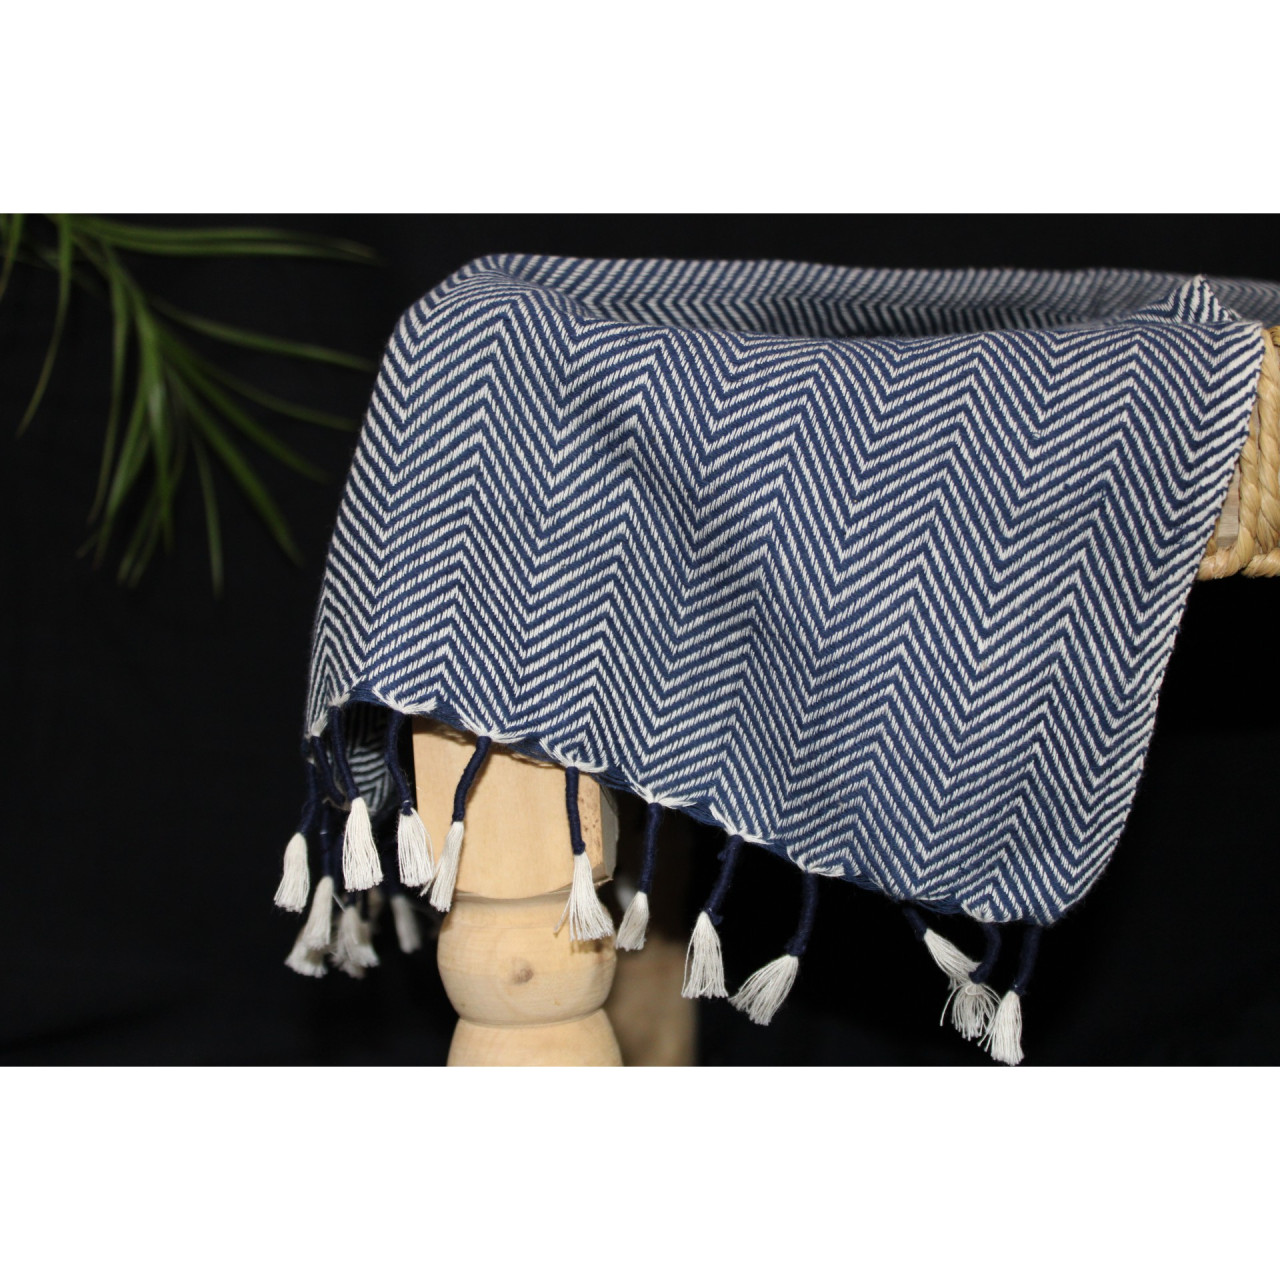 (1430) Cotton and khadi  Azo-free dyed throw from Bihar - Indigo, white, textured, piped fringes